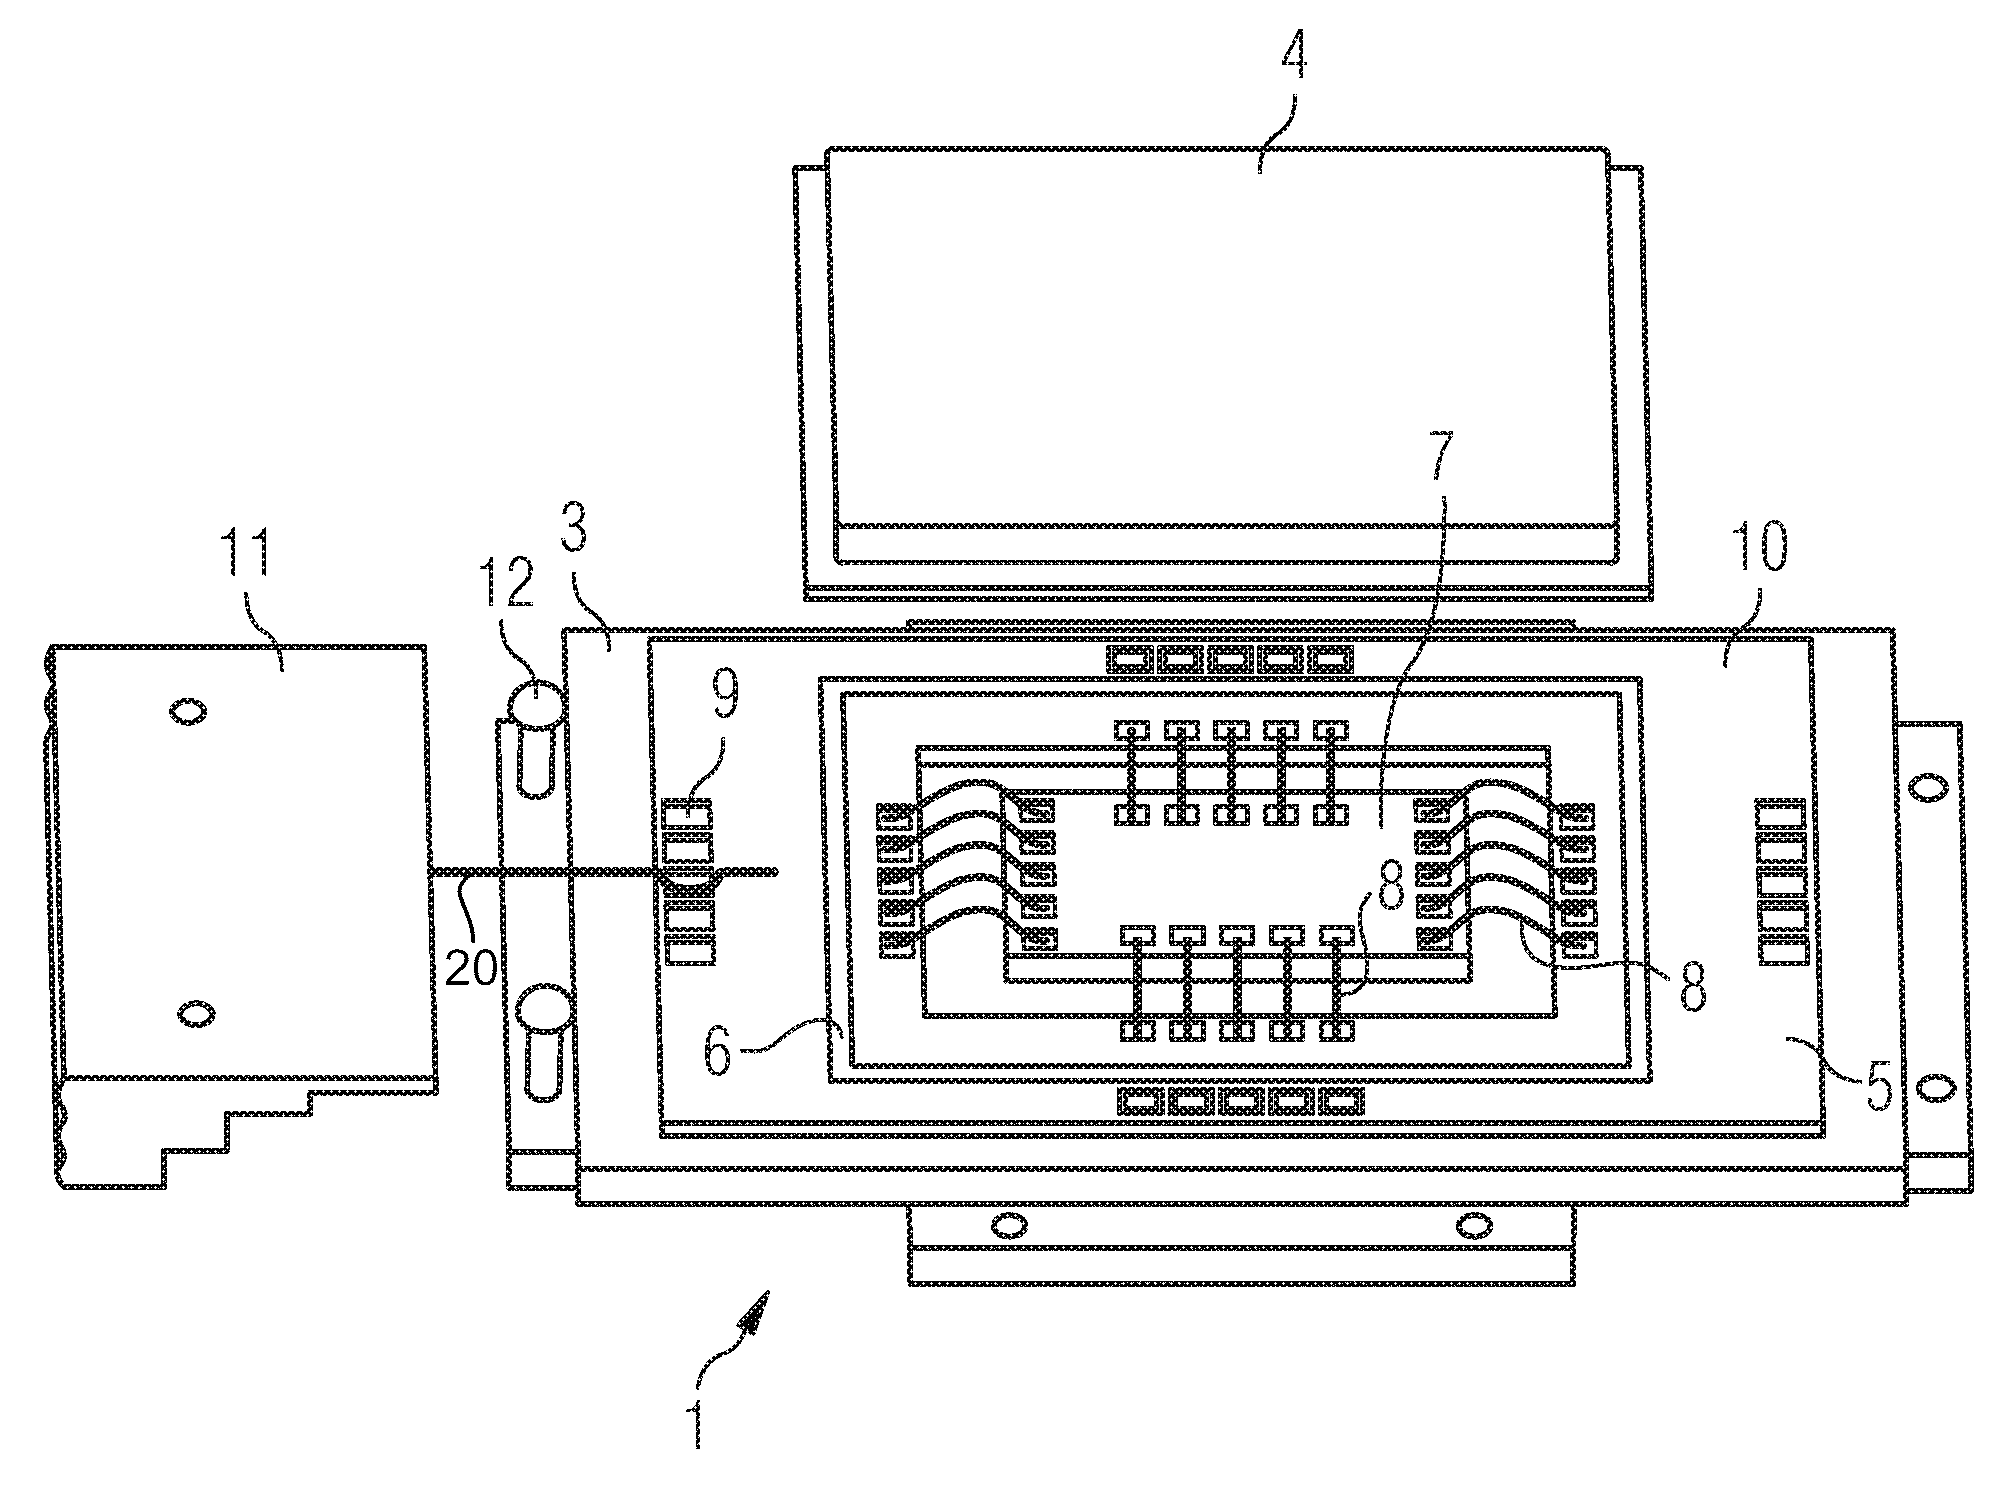 Electronics housing with standard interface